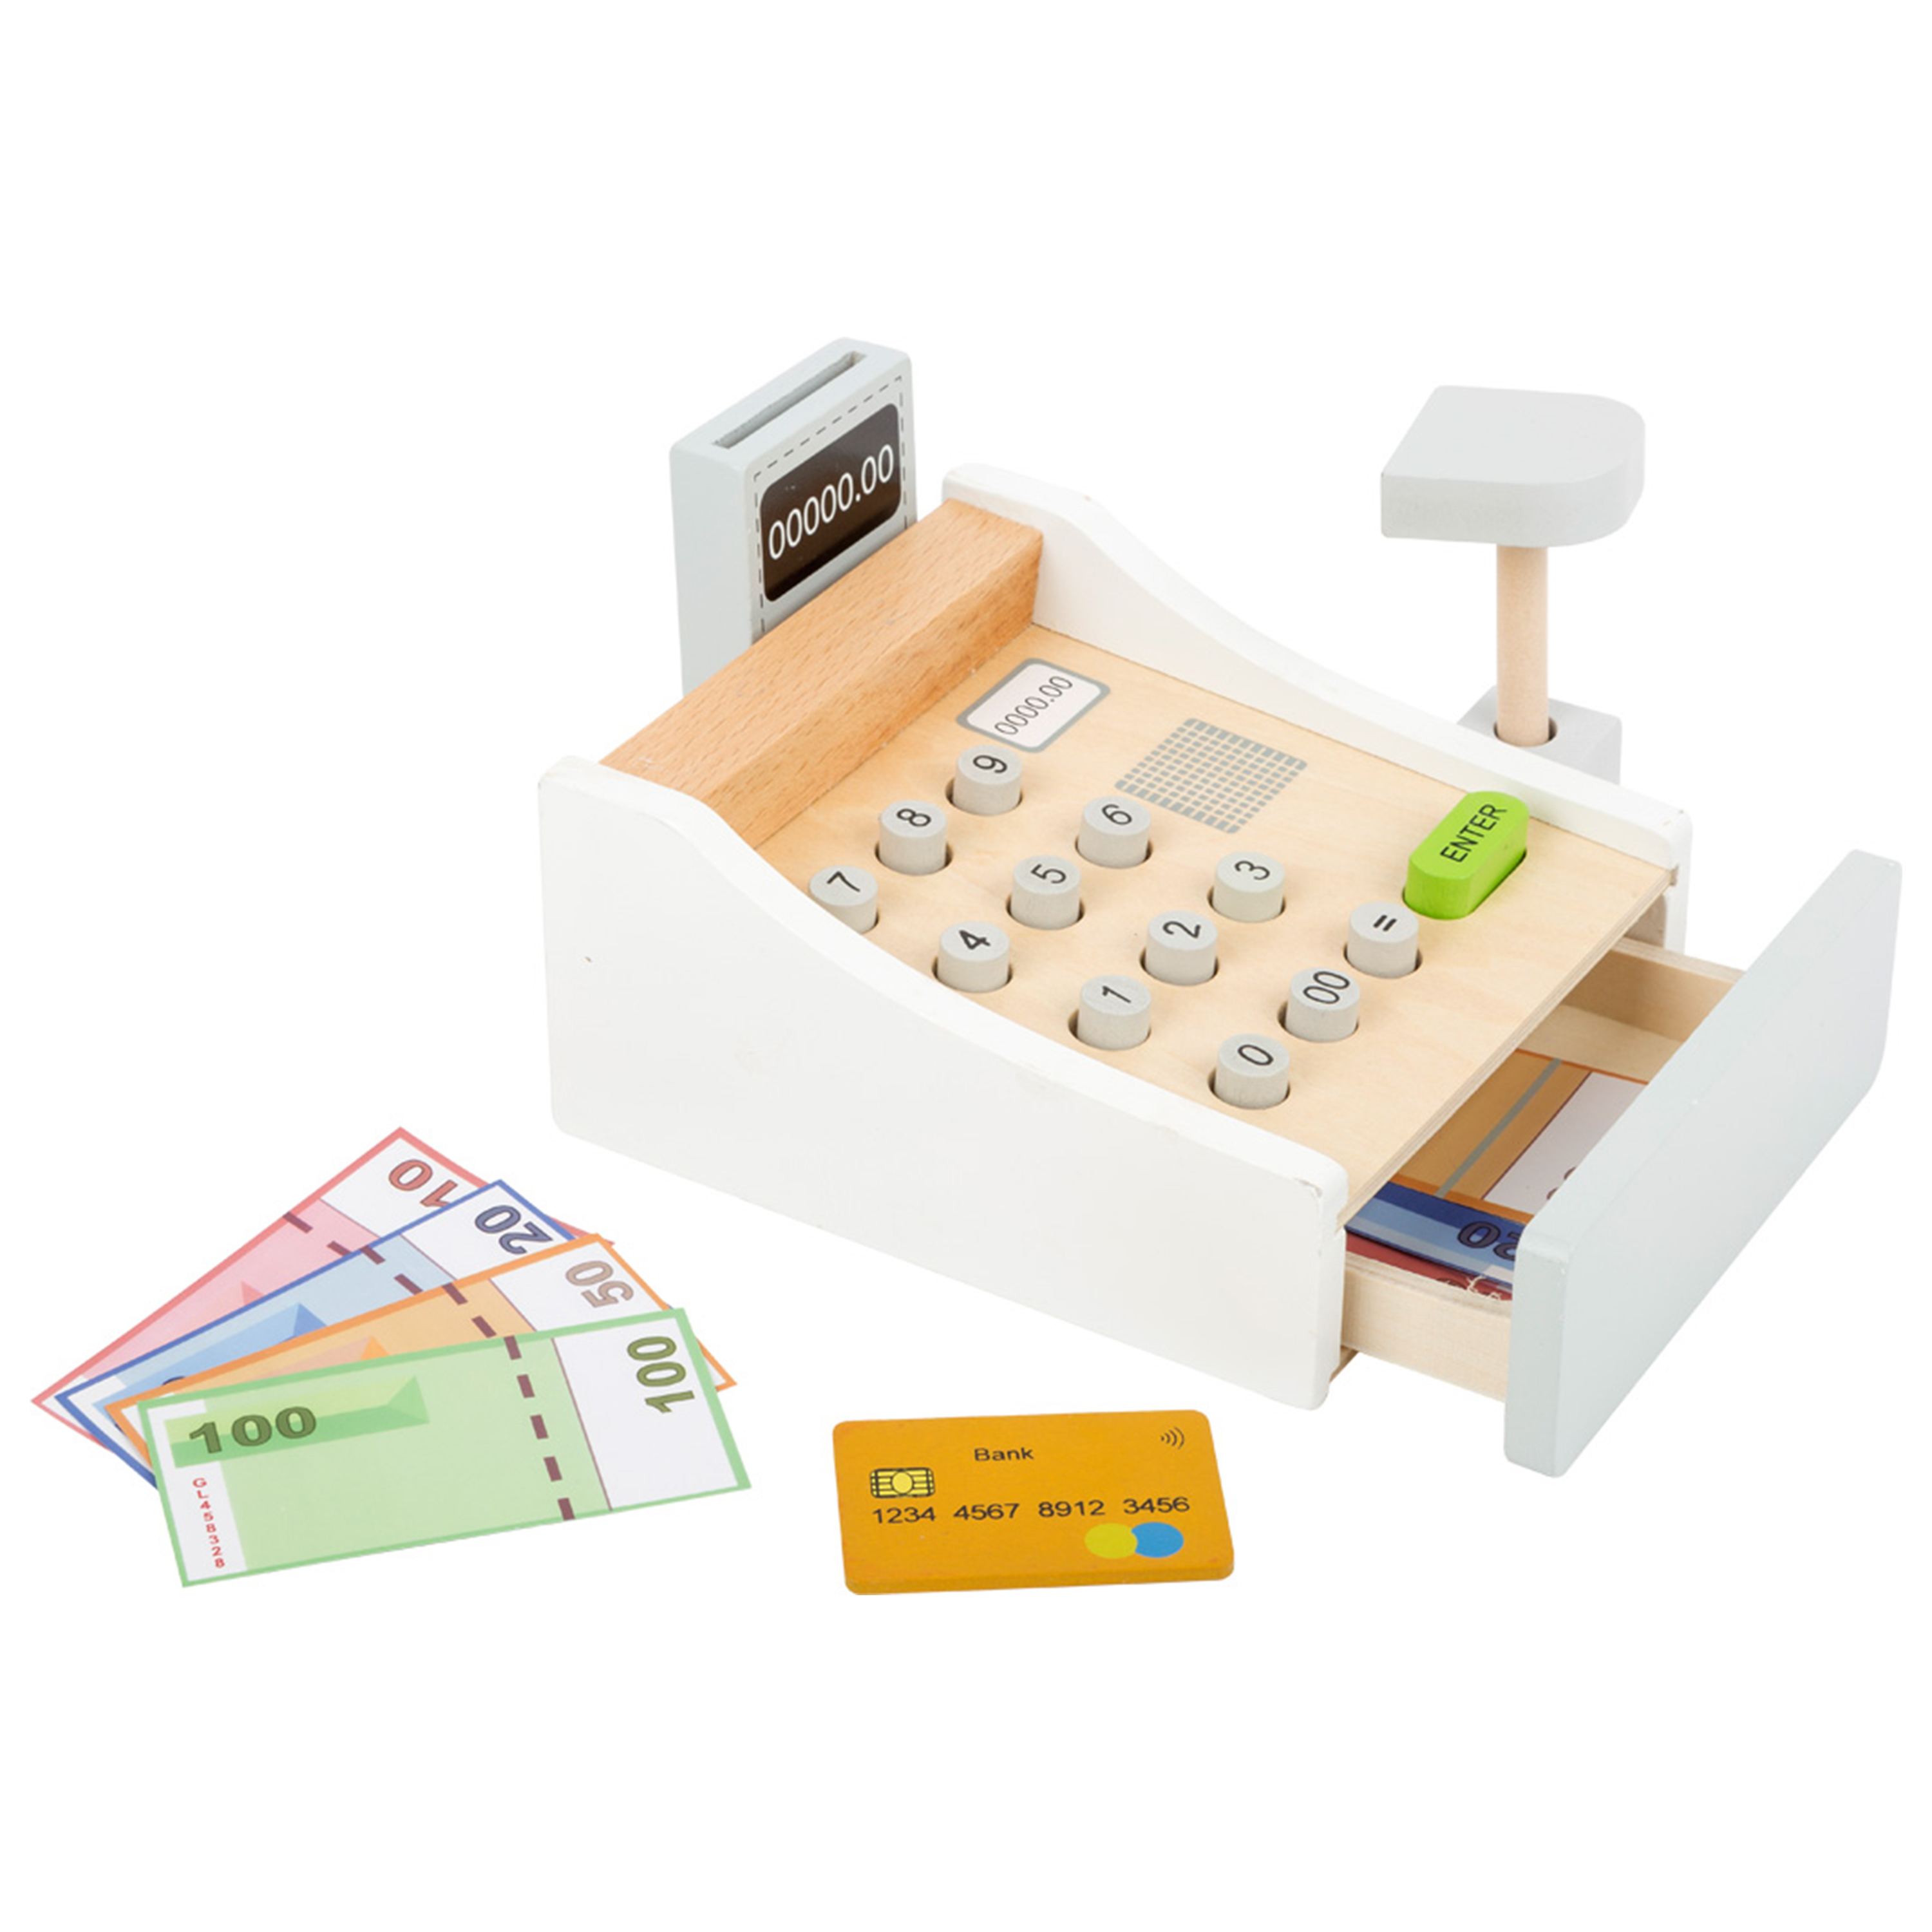 Small Foot Wooden Toys - Play Cash Register - image 1 of 4